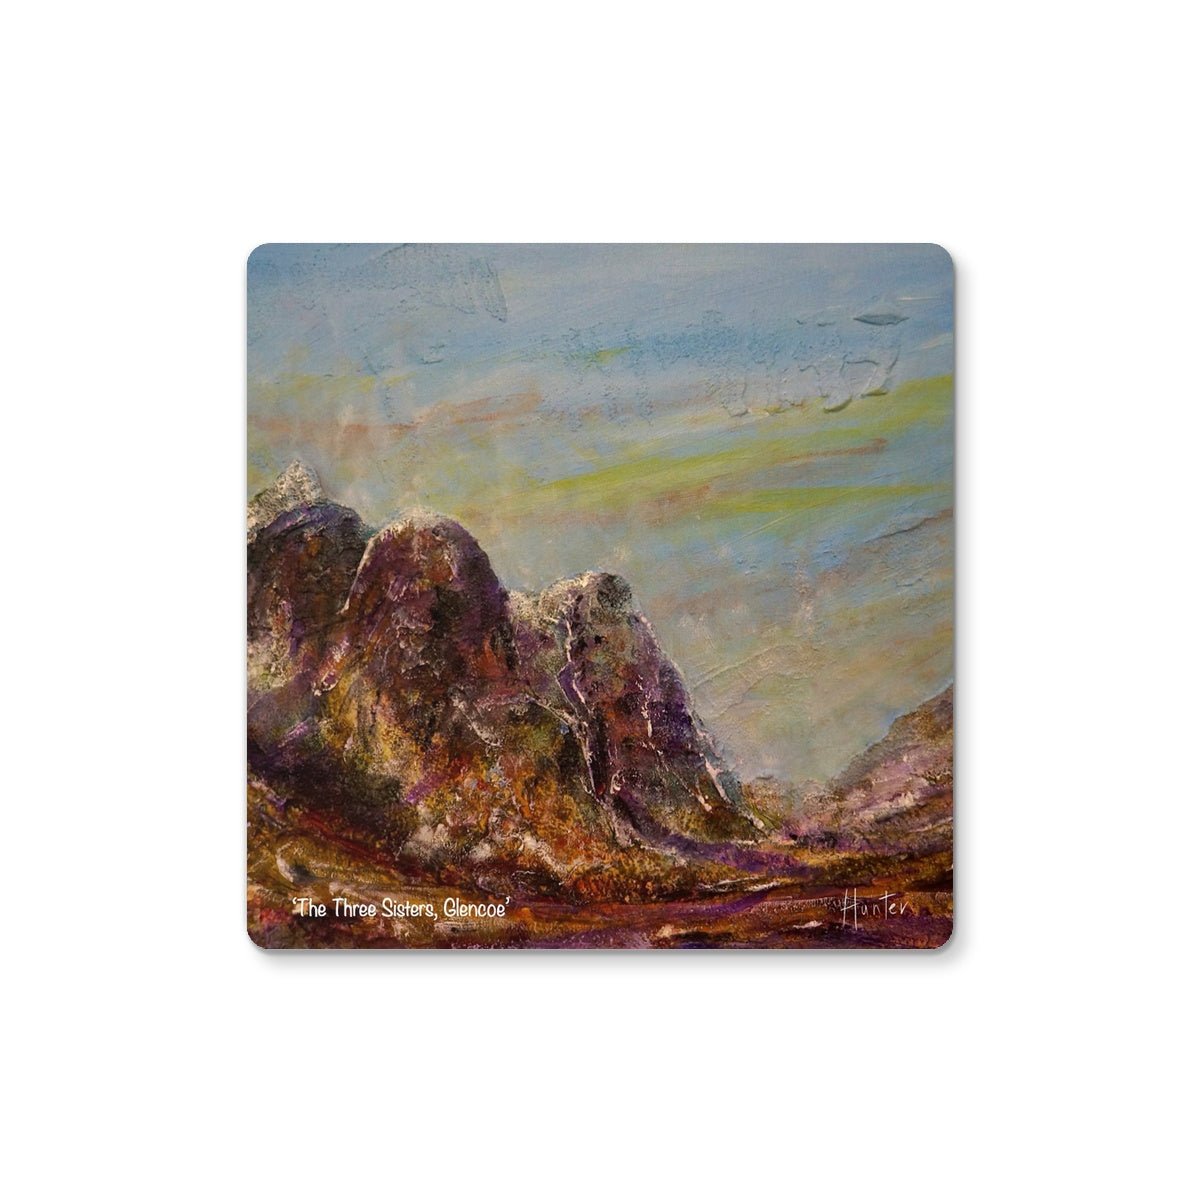 Three Sisters Glencoe Art Gifts Coaster-Coasters-Glencoe Art Gallery-6 Coasters-Paintings, Prints, Homeware, Art Gifts From Scotland By Scottish Artist Kevin Hunter